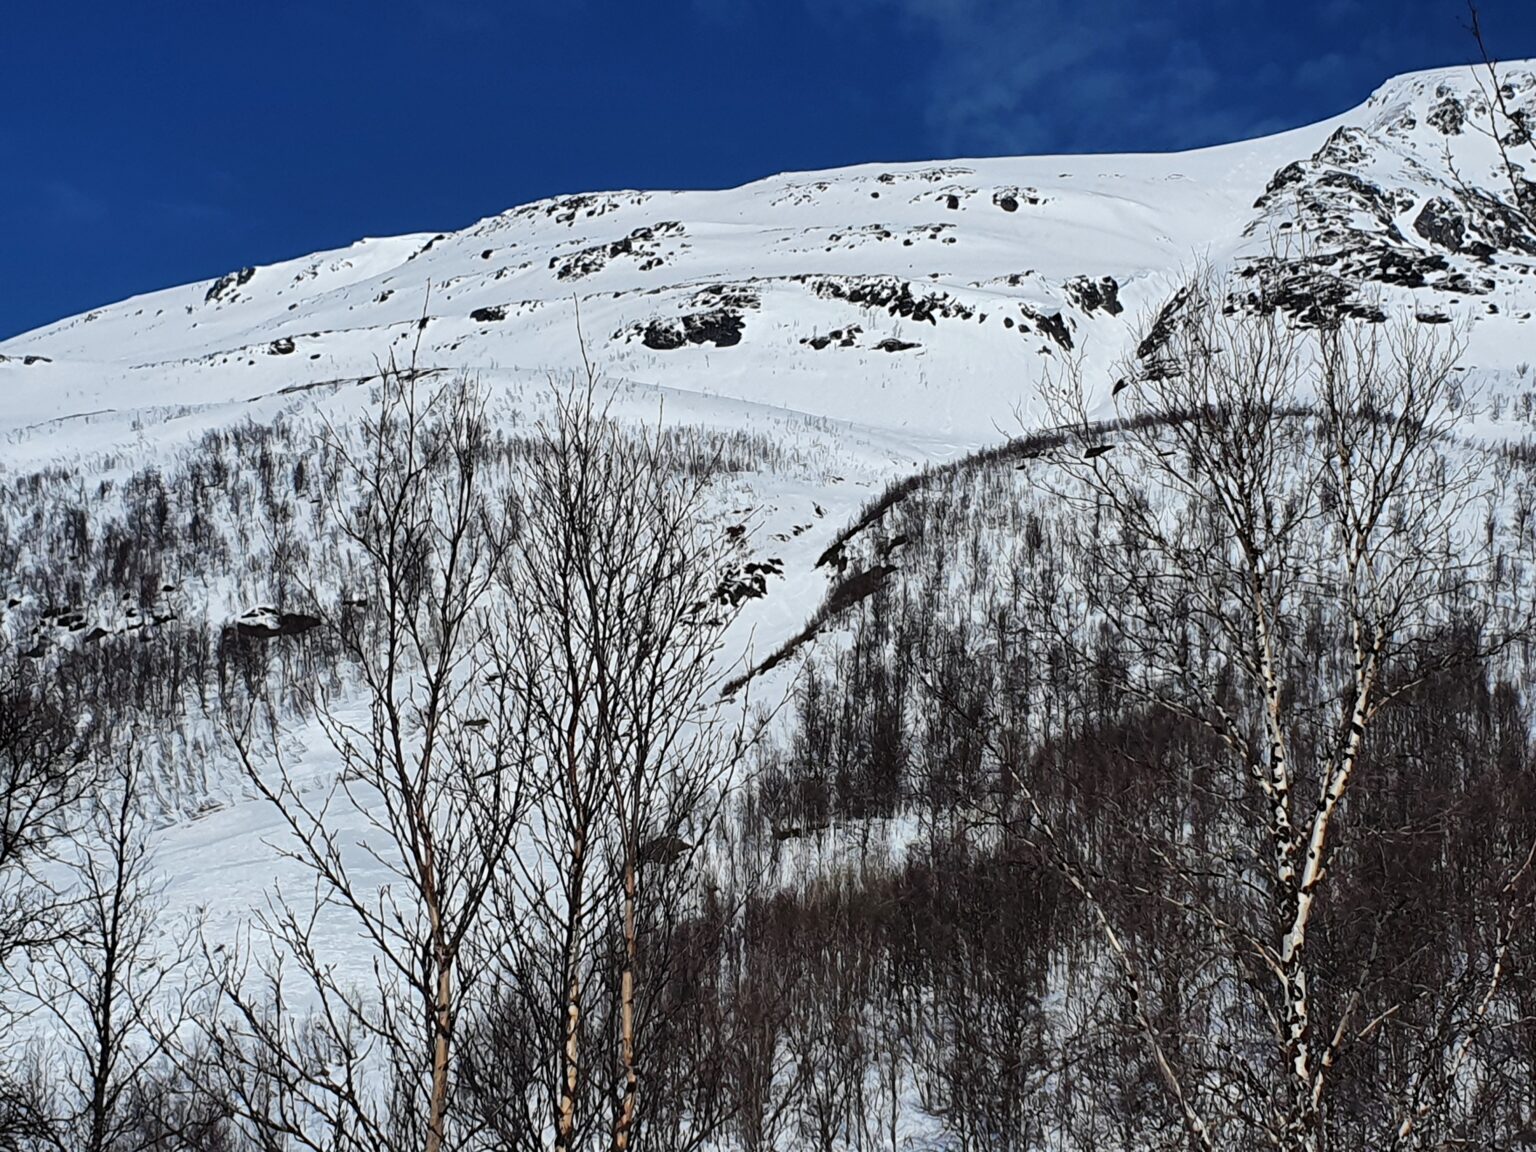 Looking back up at our tracks on the south chute of Tamokfjellet